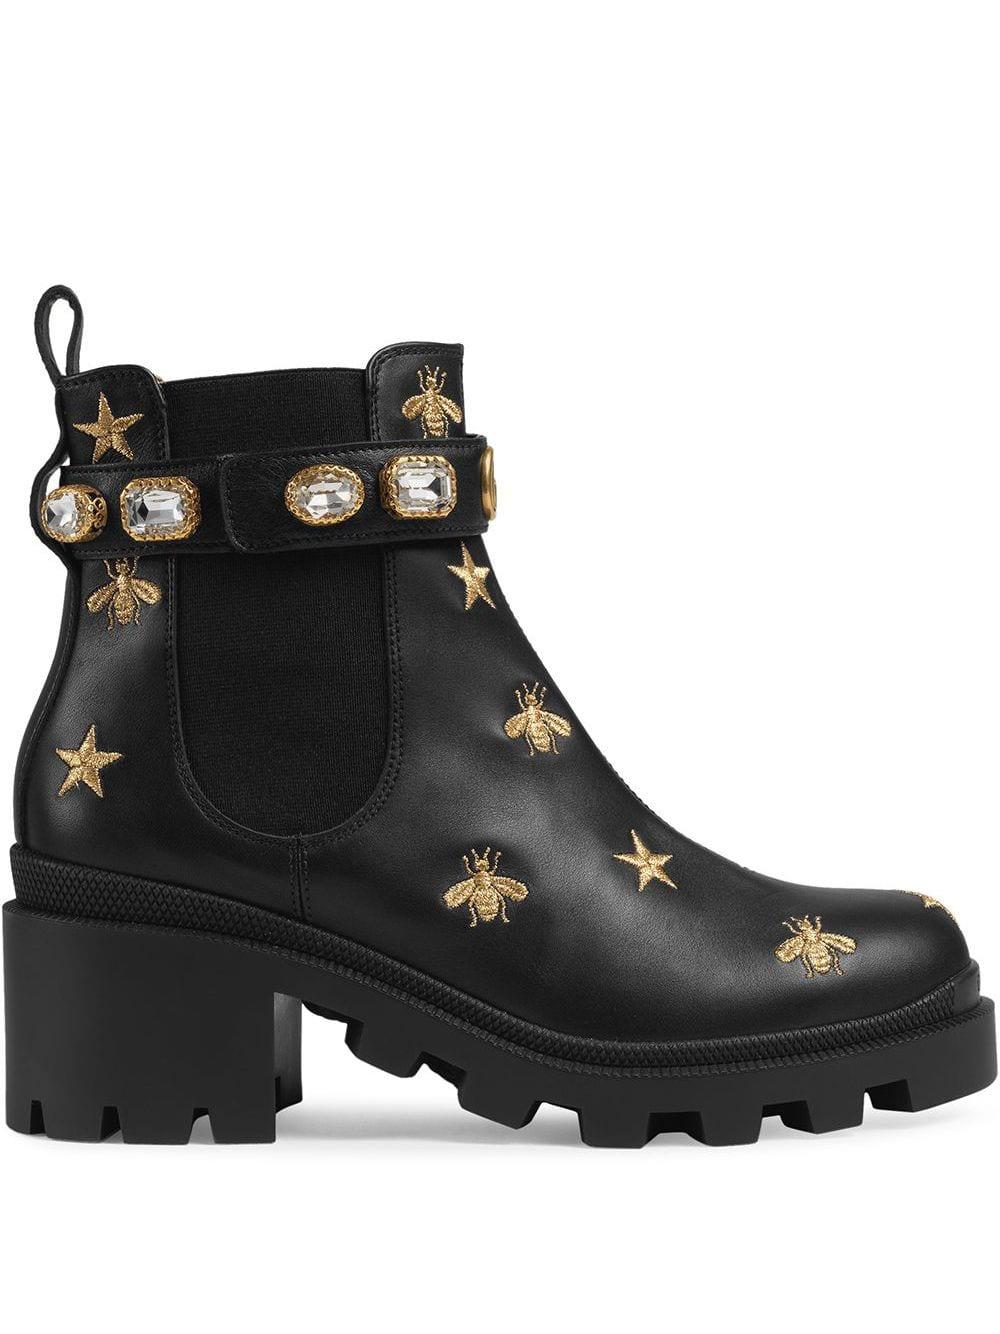 Gucci Embroidered Leather Ankle Boot With Belt in Black - Lyst